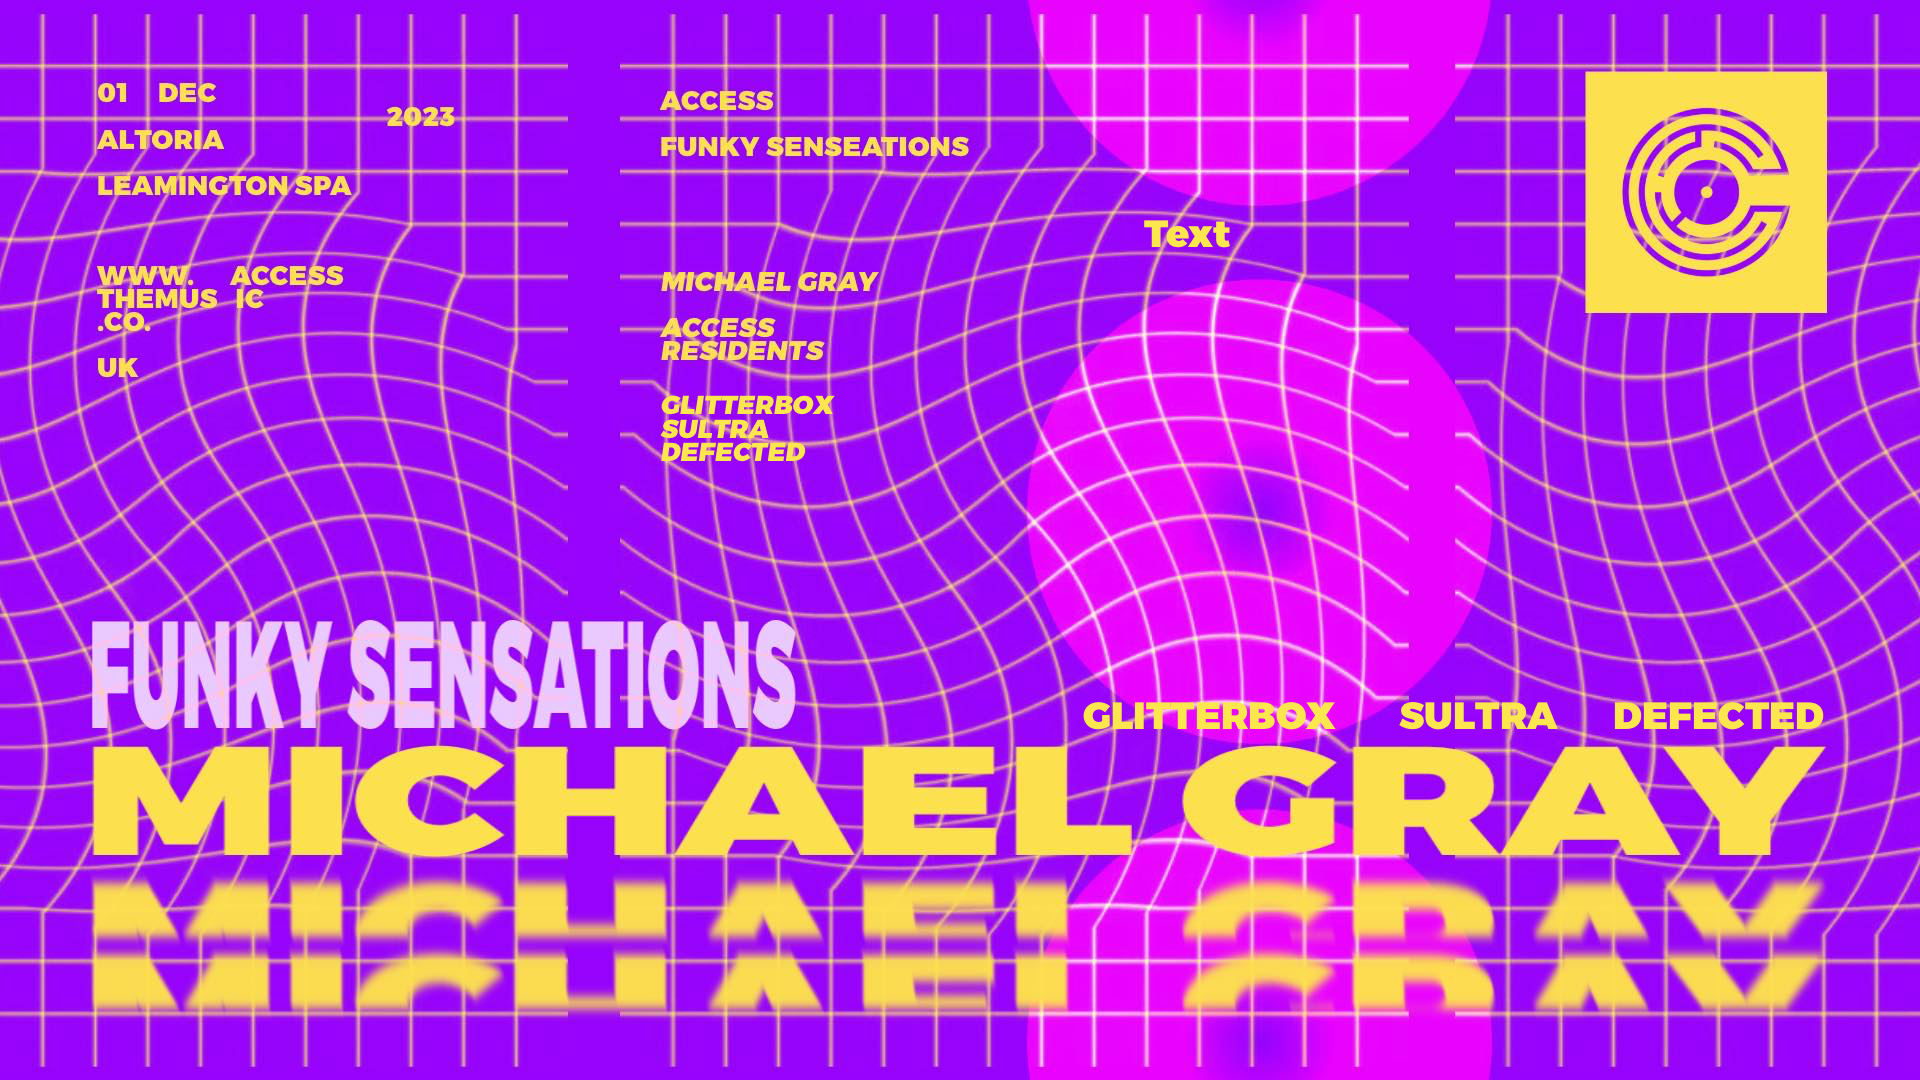 Access: Funky Sensations with Michael Gray - Página frontal